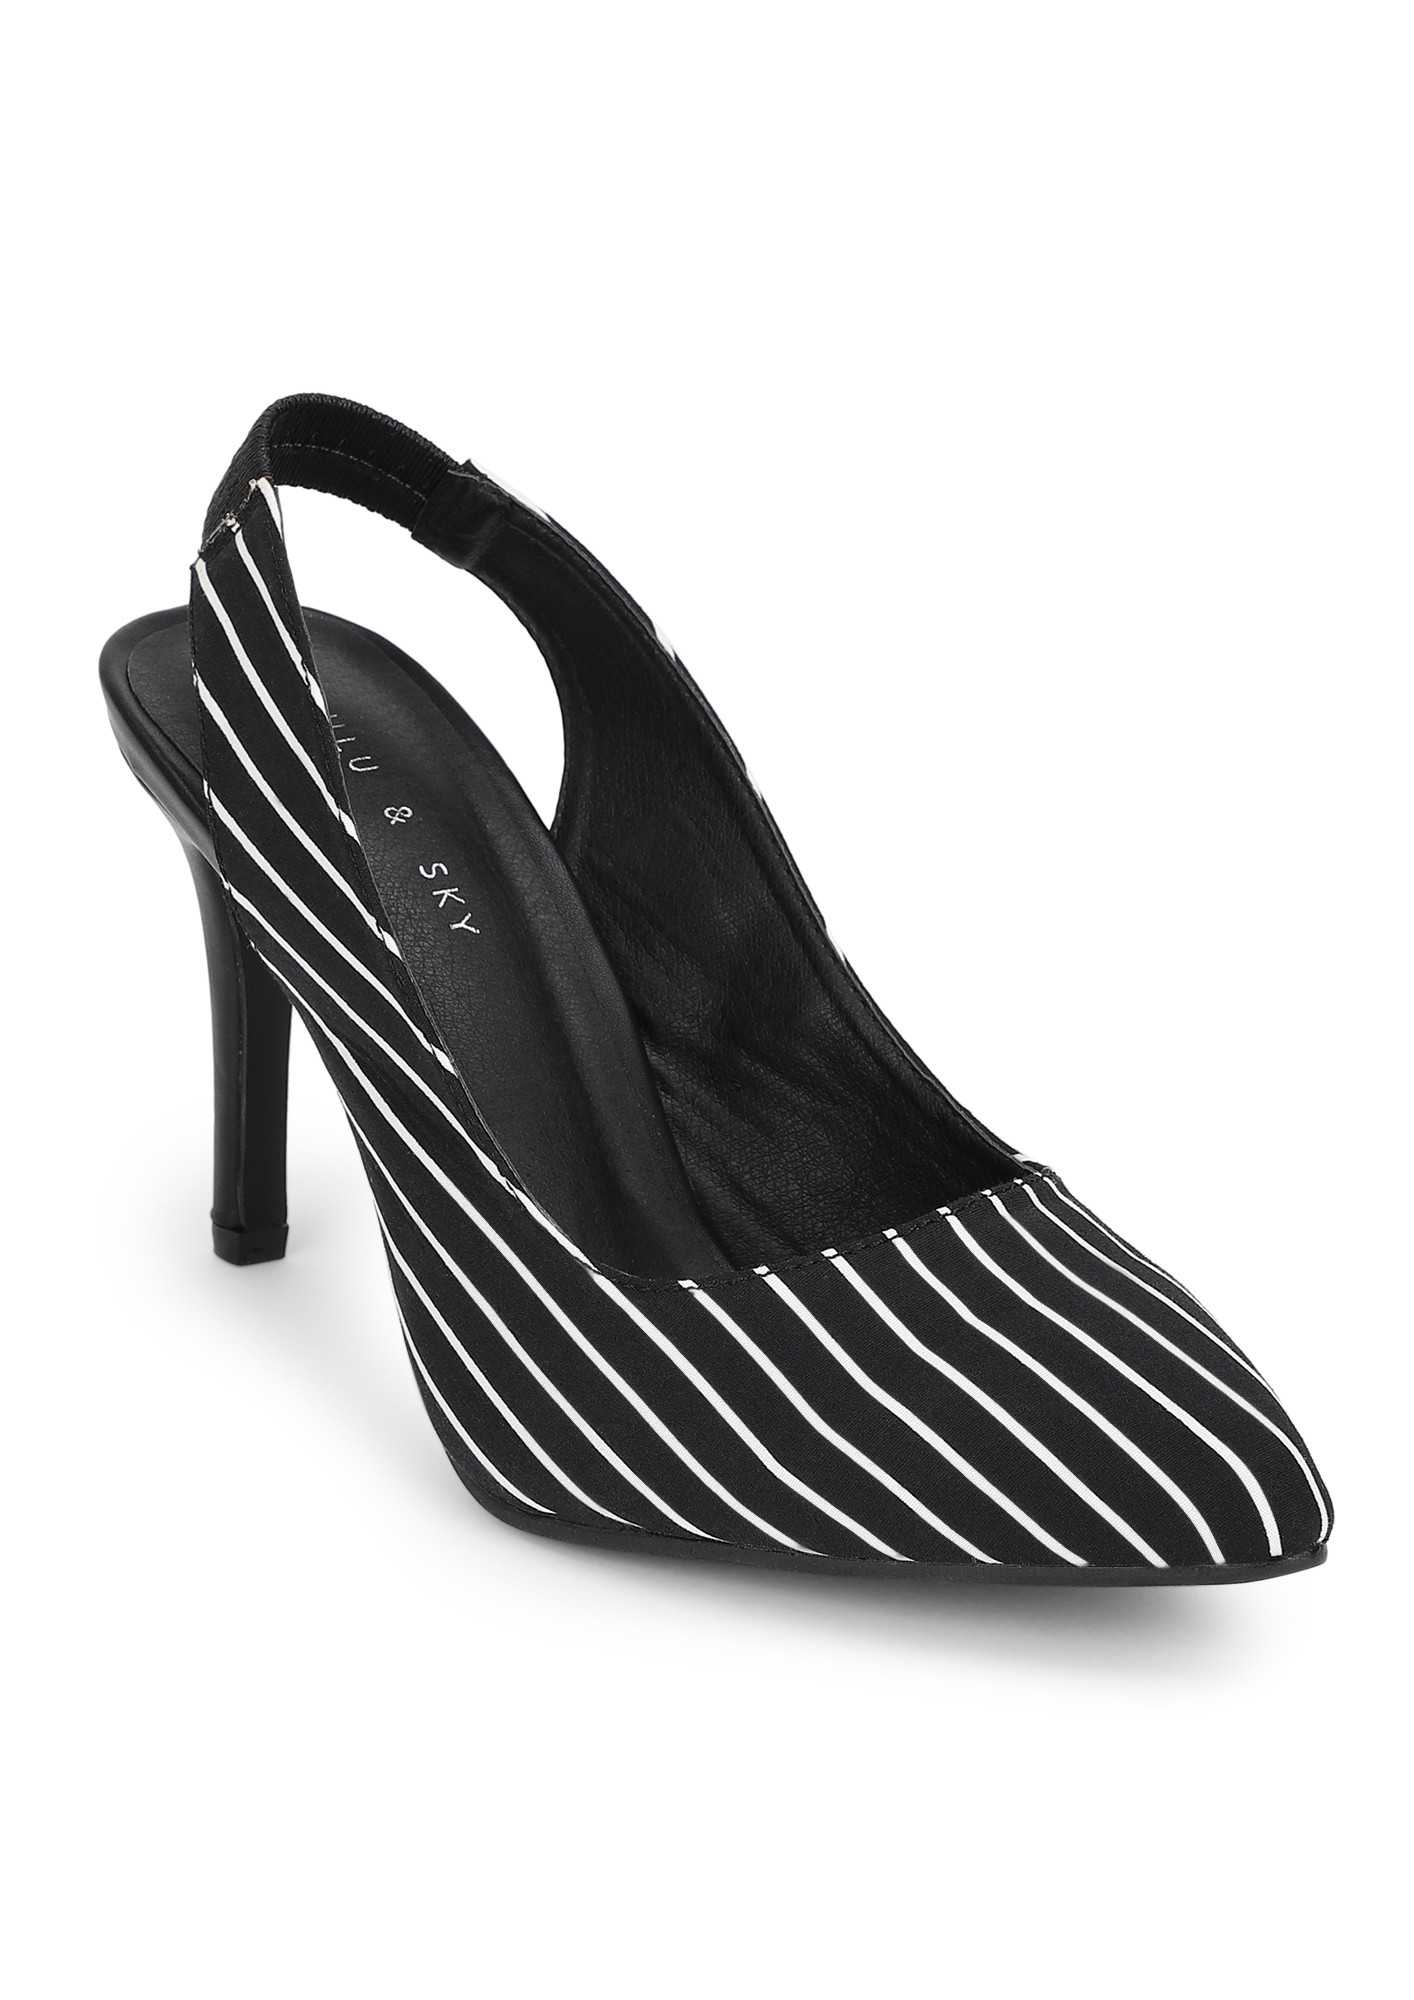 IN LINE WITH THE TREND STRIPED BLACK PUMPS